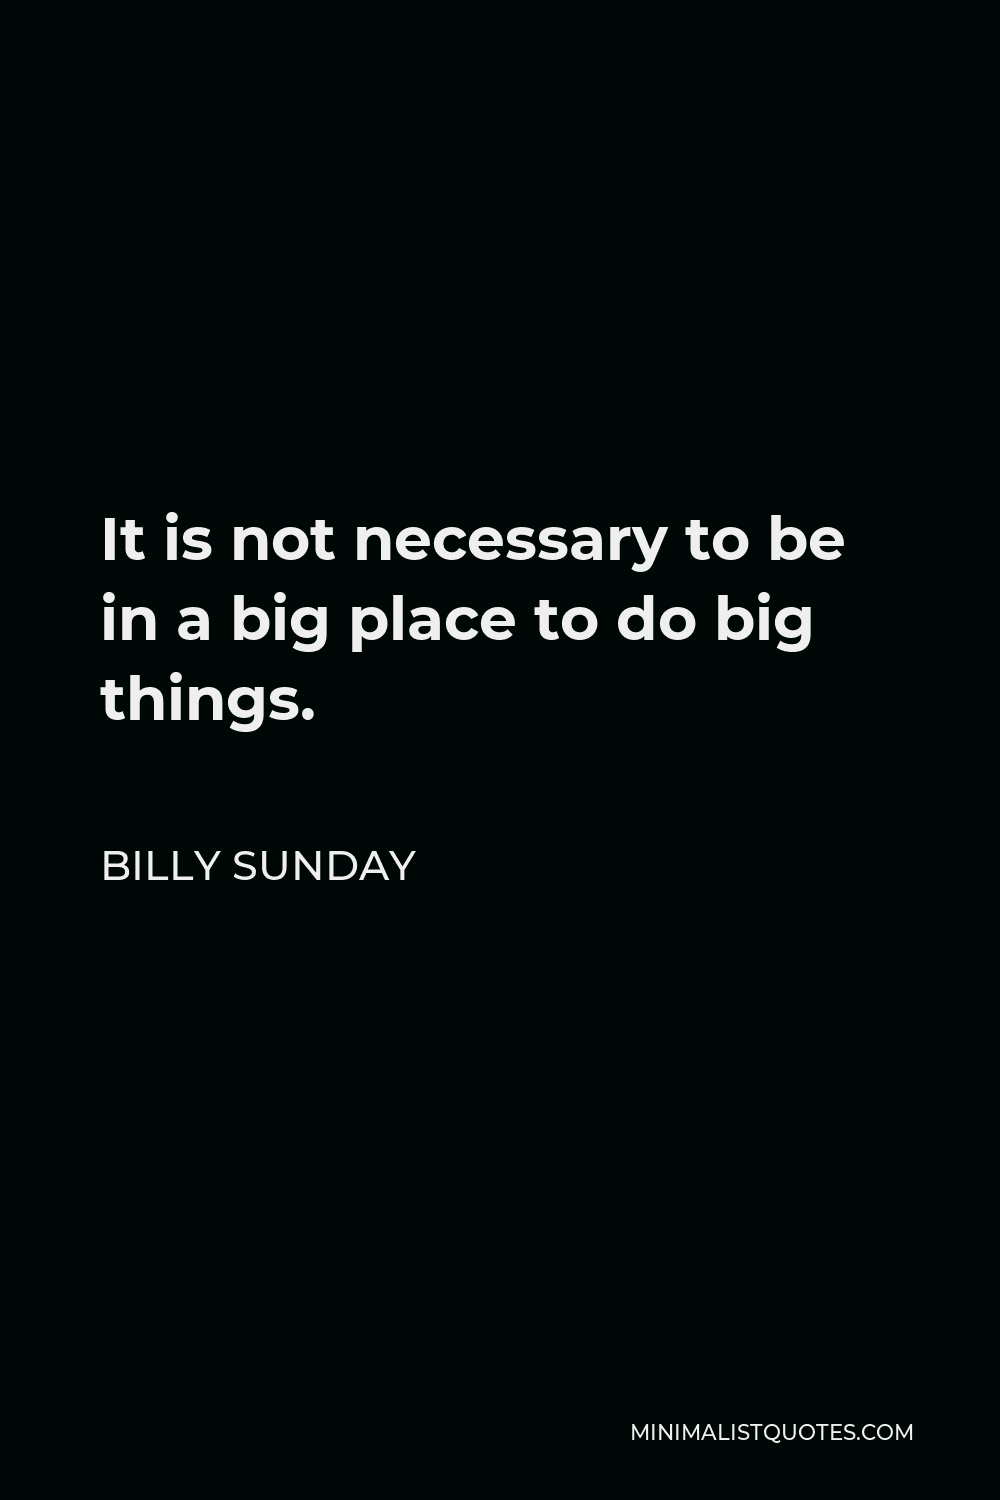 Billy Sunday Quote - It is not necessary to be in a big place to do big things.